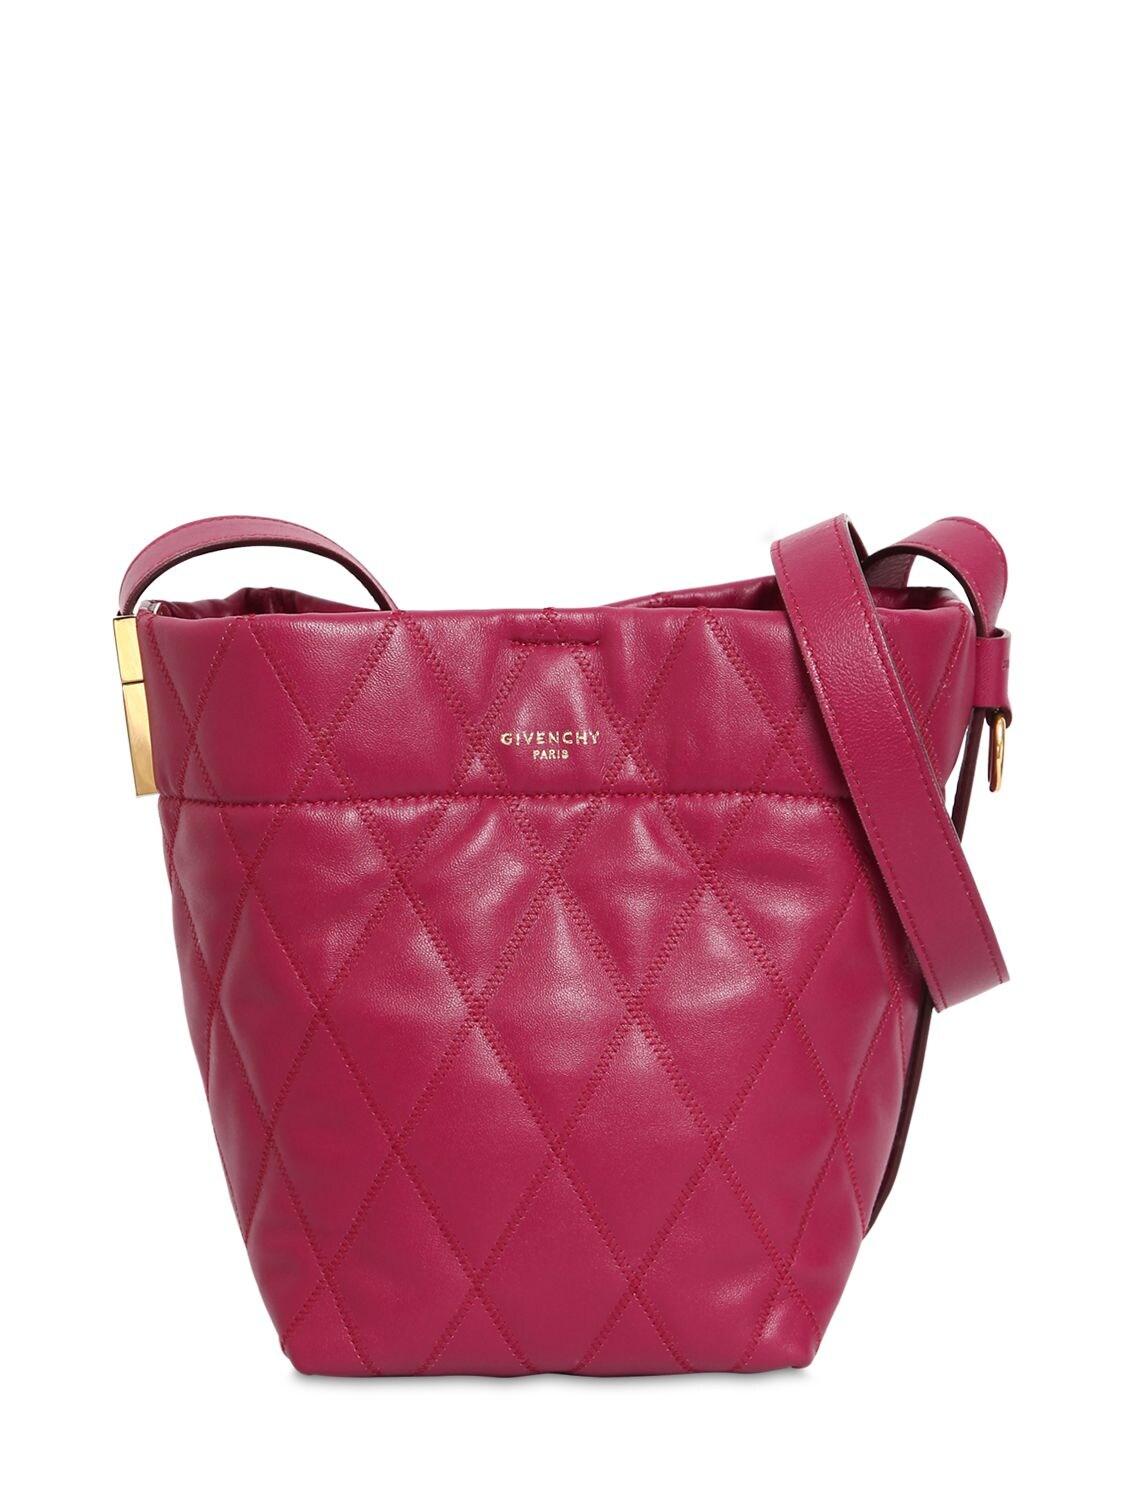 Givenchy Mini Gv Quilted Leather Bucket Bag in Purple - Lyst